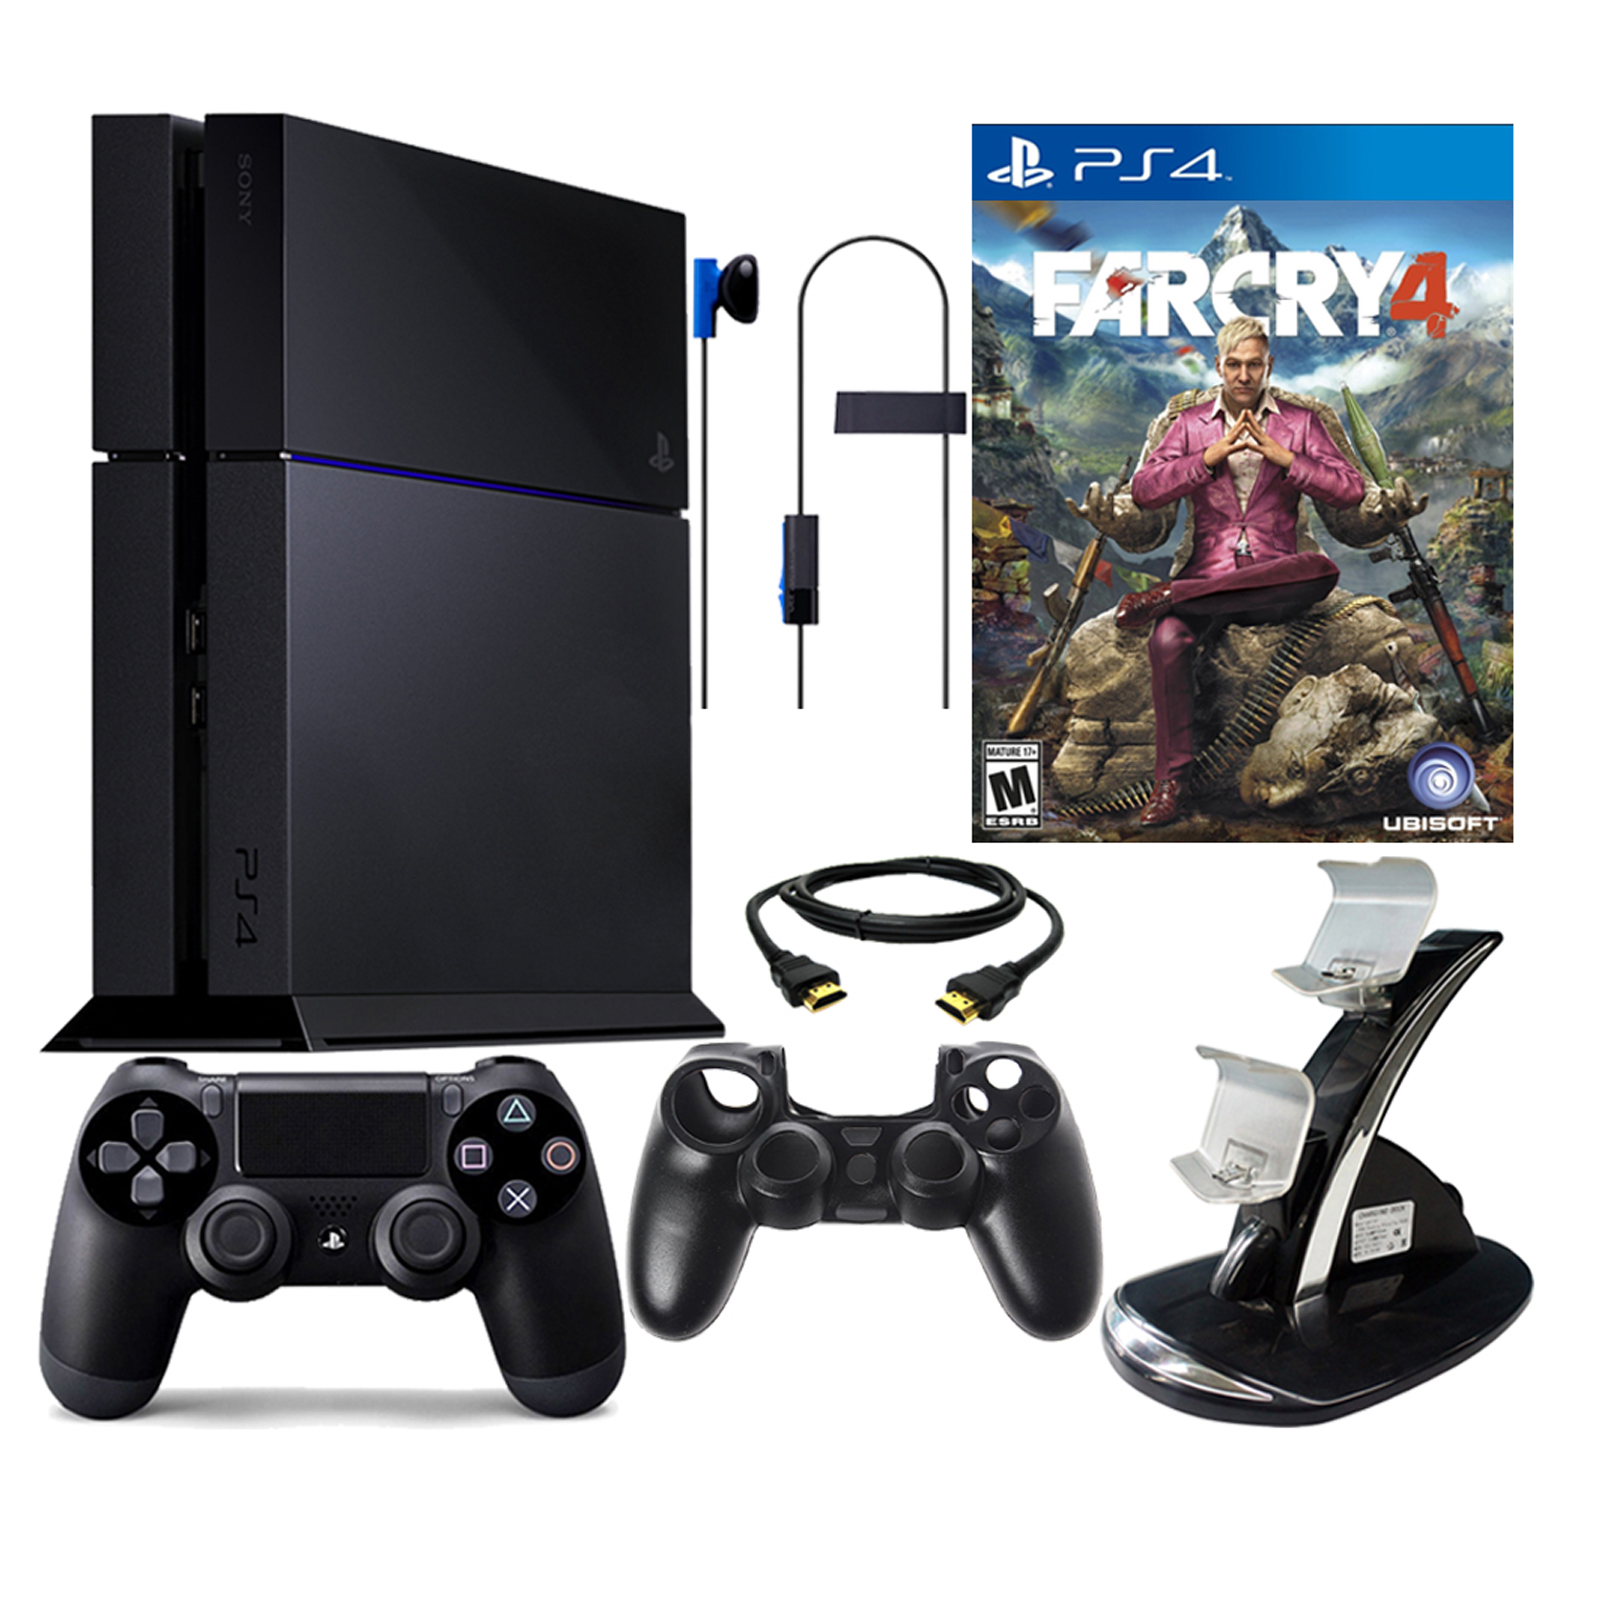 Sony PS4 500GB Bundle with Far Cry 4 & Accessories